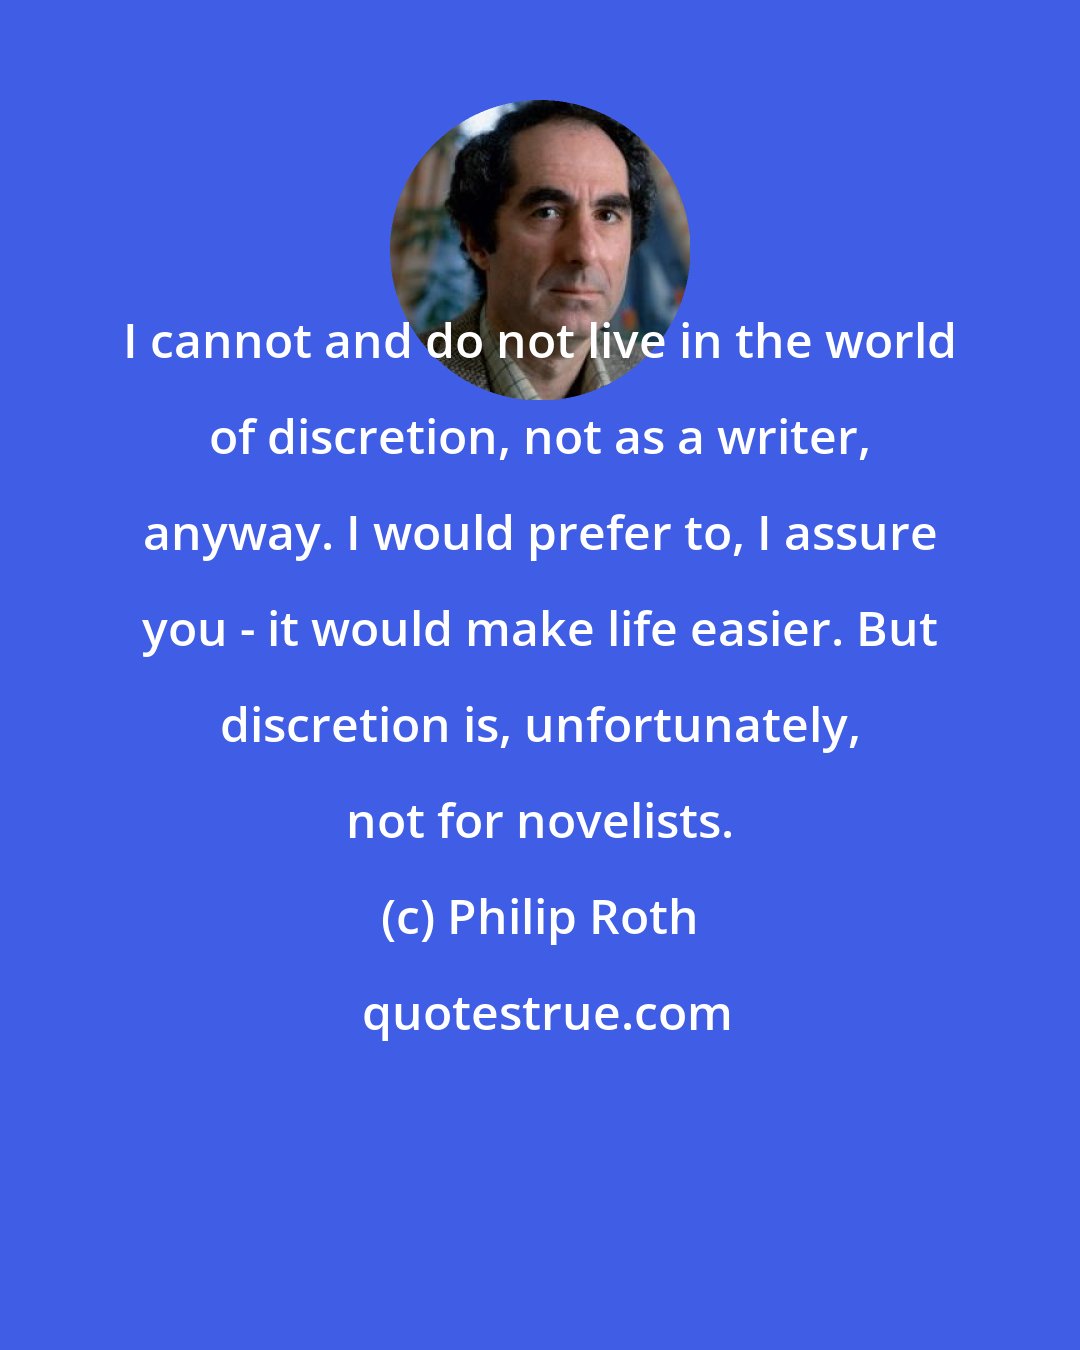 Philip Roth: I cannot and do not live in the world of discretion, not as a writer, anyway. I would prefer to, I assure you - it would make life easier. But discretion is, unfortunately, not for novelists.